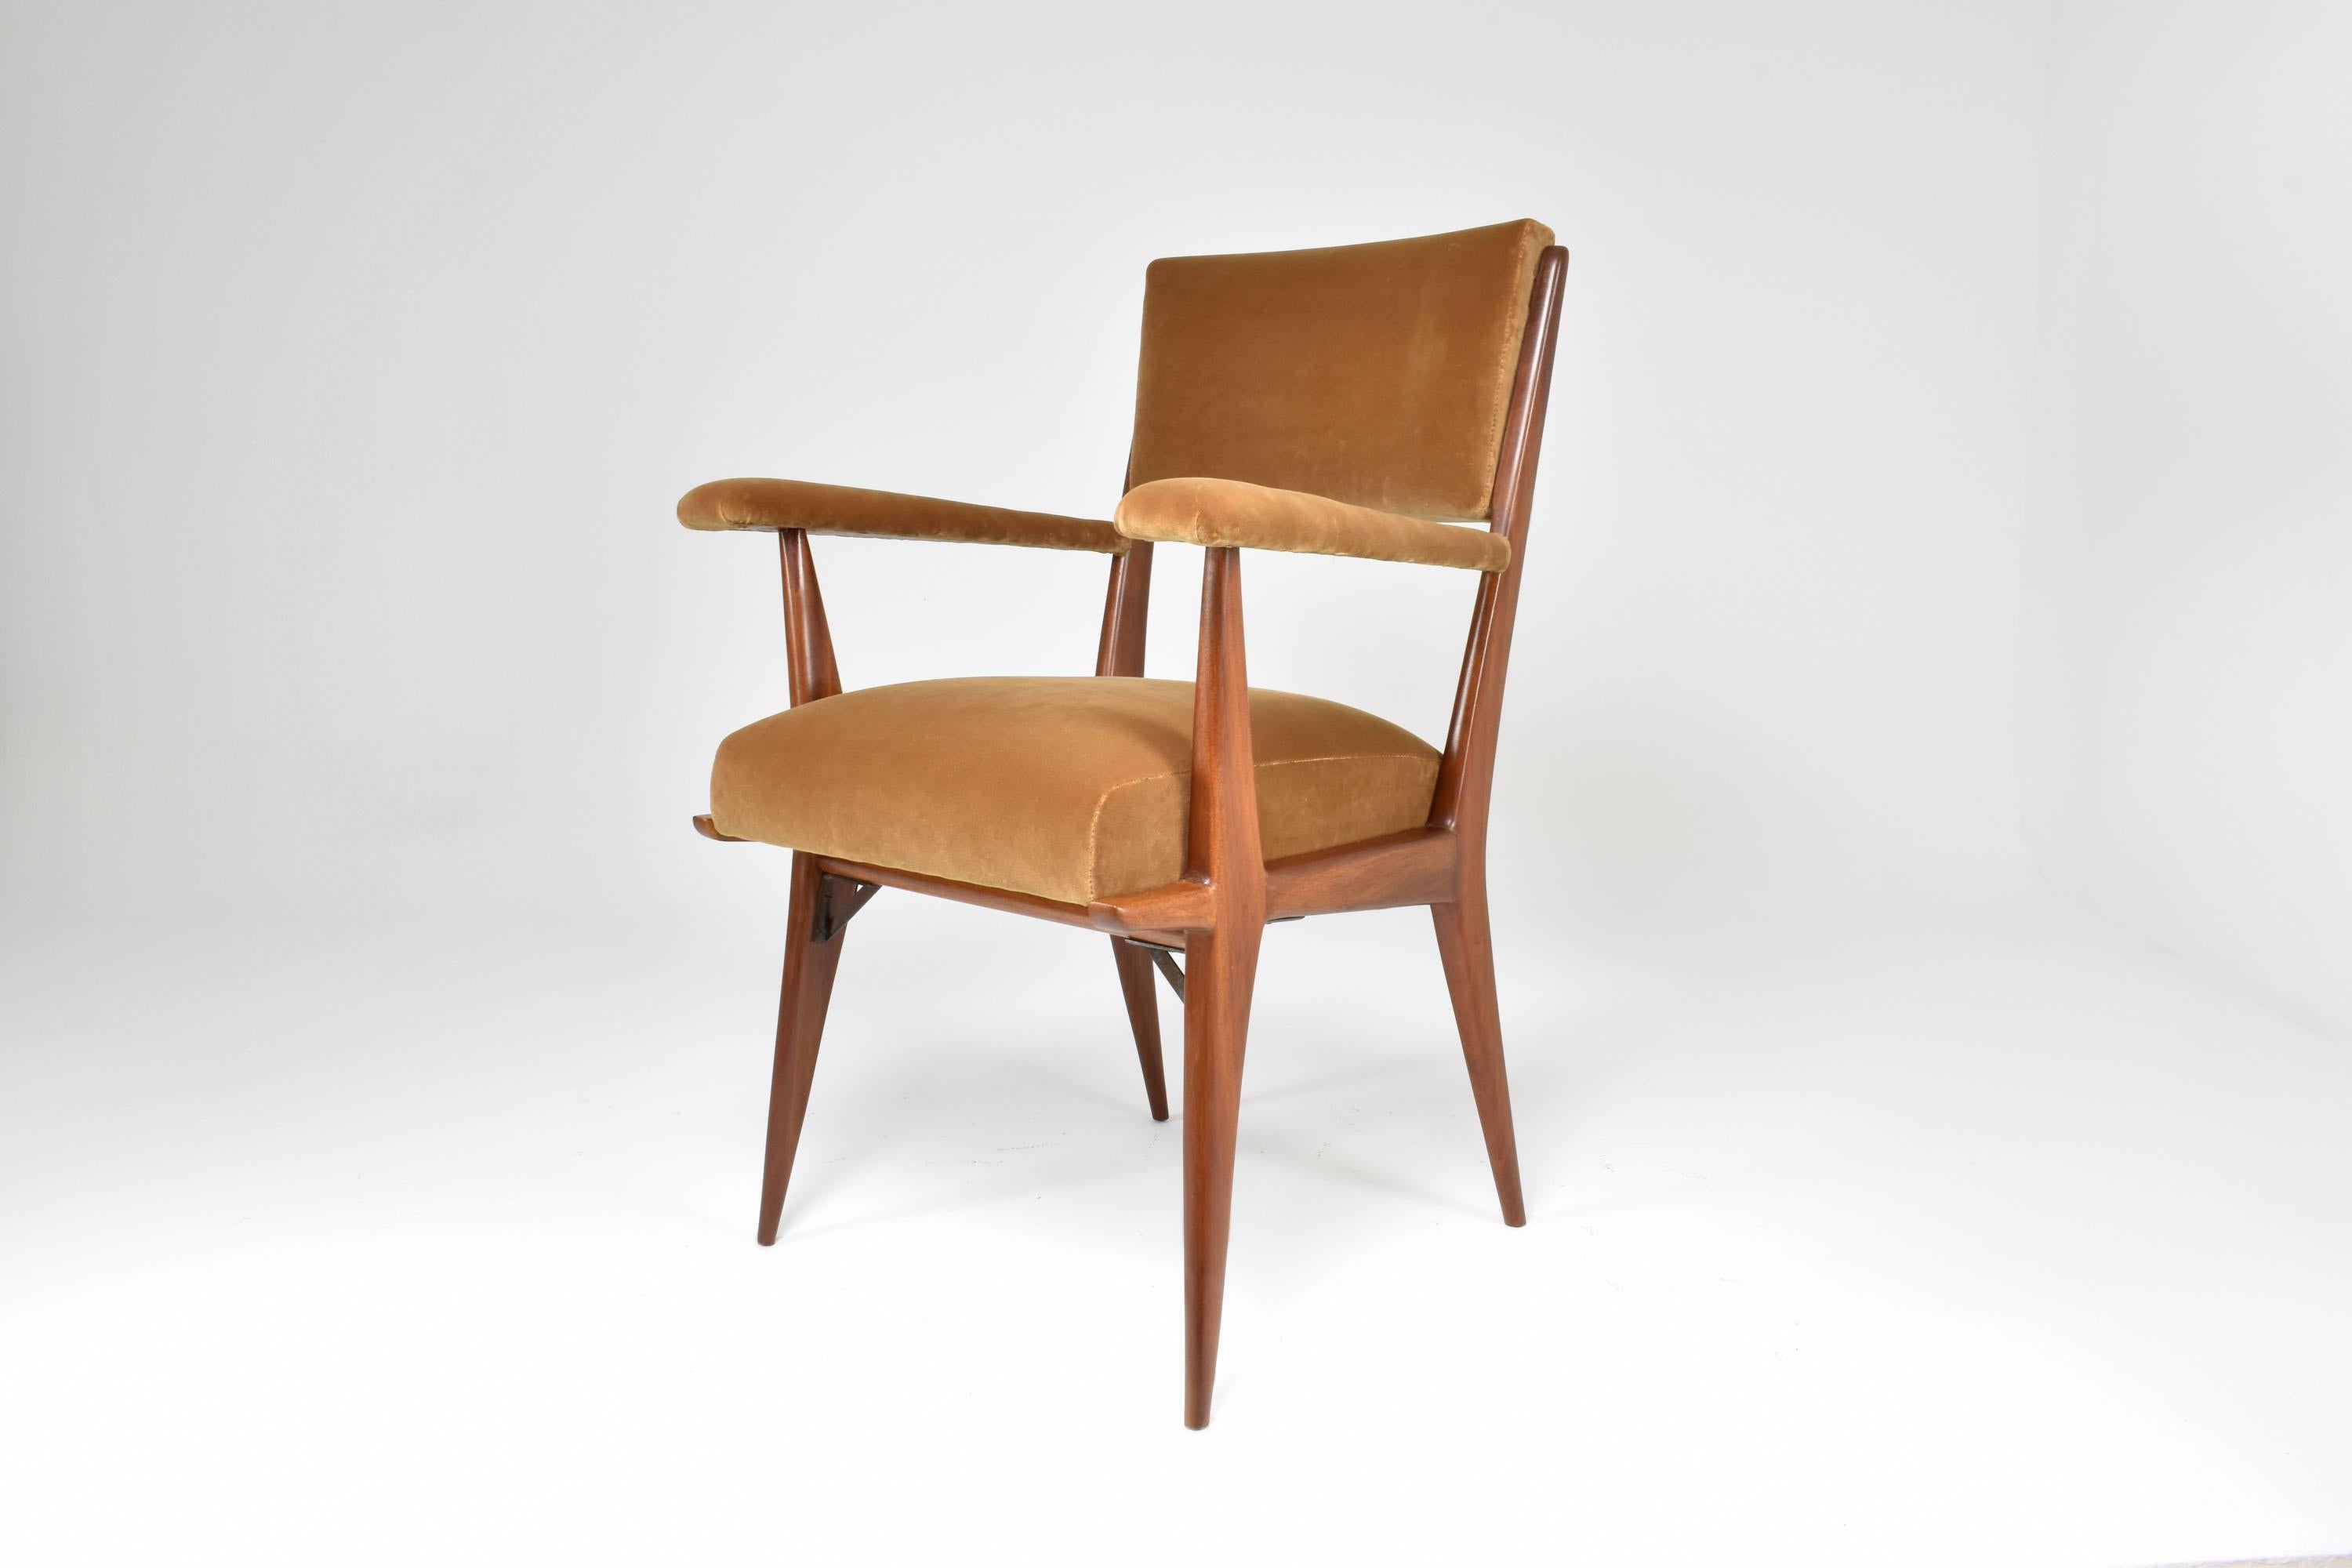 An important collectible walnut handcrafted armchair from the Italian 1950's mid-century period designed by Franco Cavatorta and labeled at the back by his family business Silvio Cavatorta. This comfortable piece is highlighted by its excellent